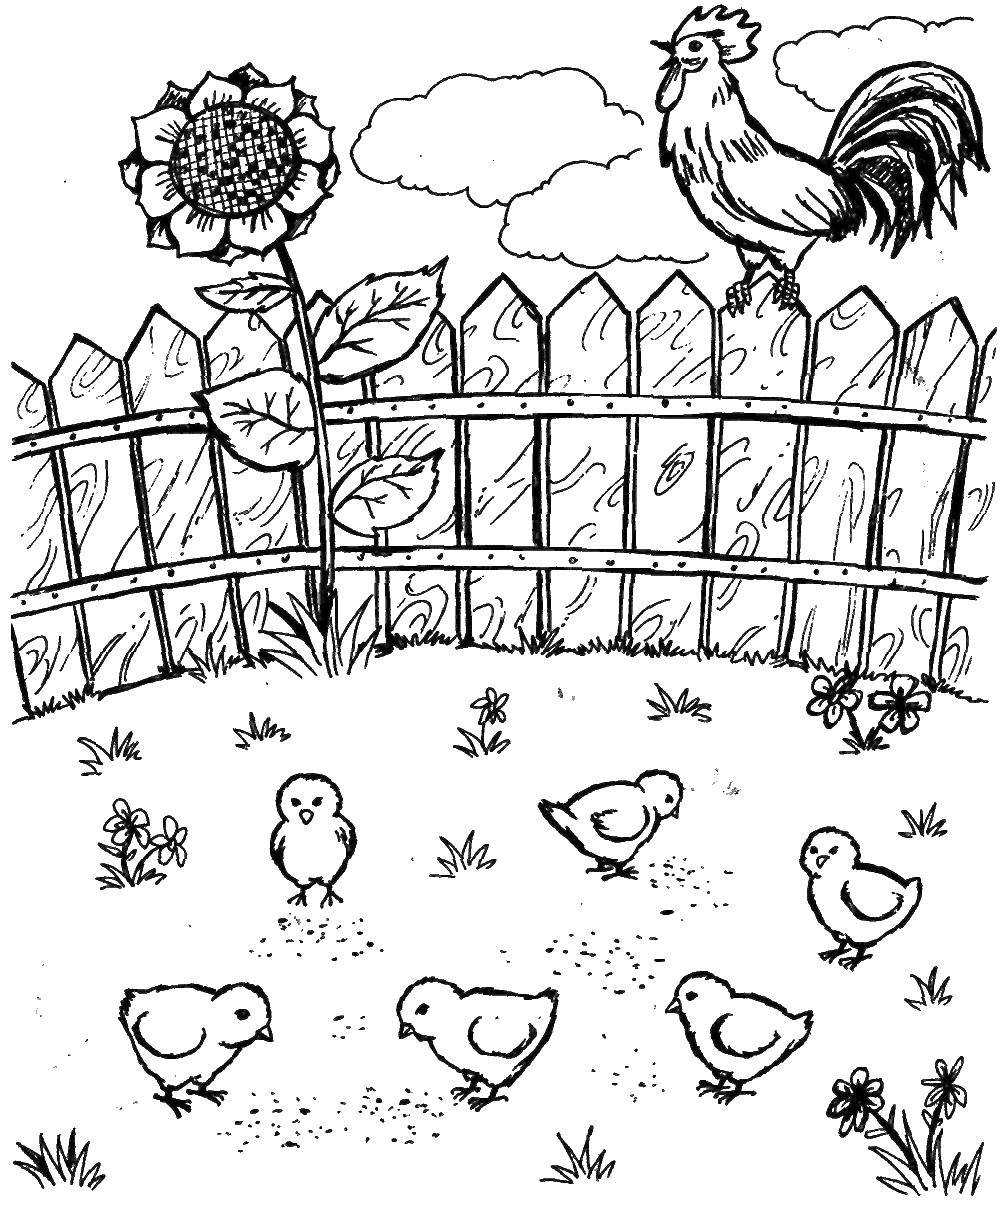 Coloring Rooster and chickens. Category coloring. Tags:  rooster, chickens, sunflower.